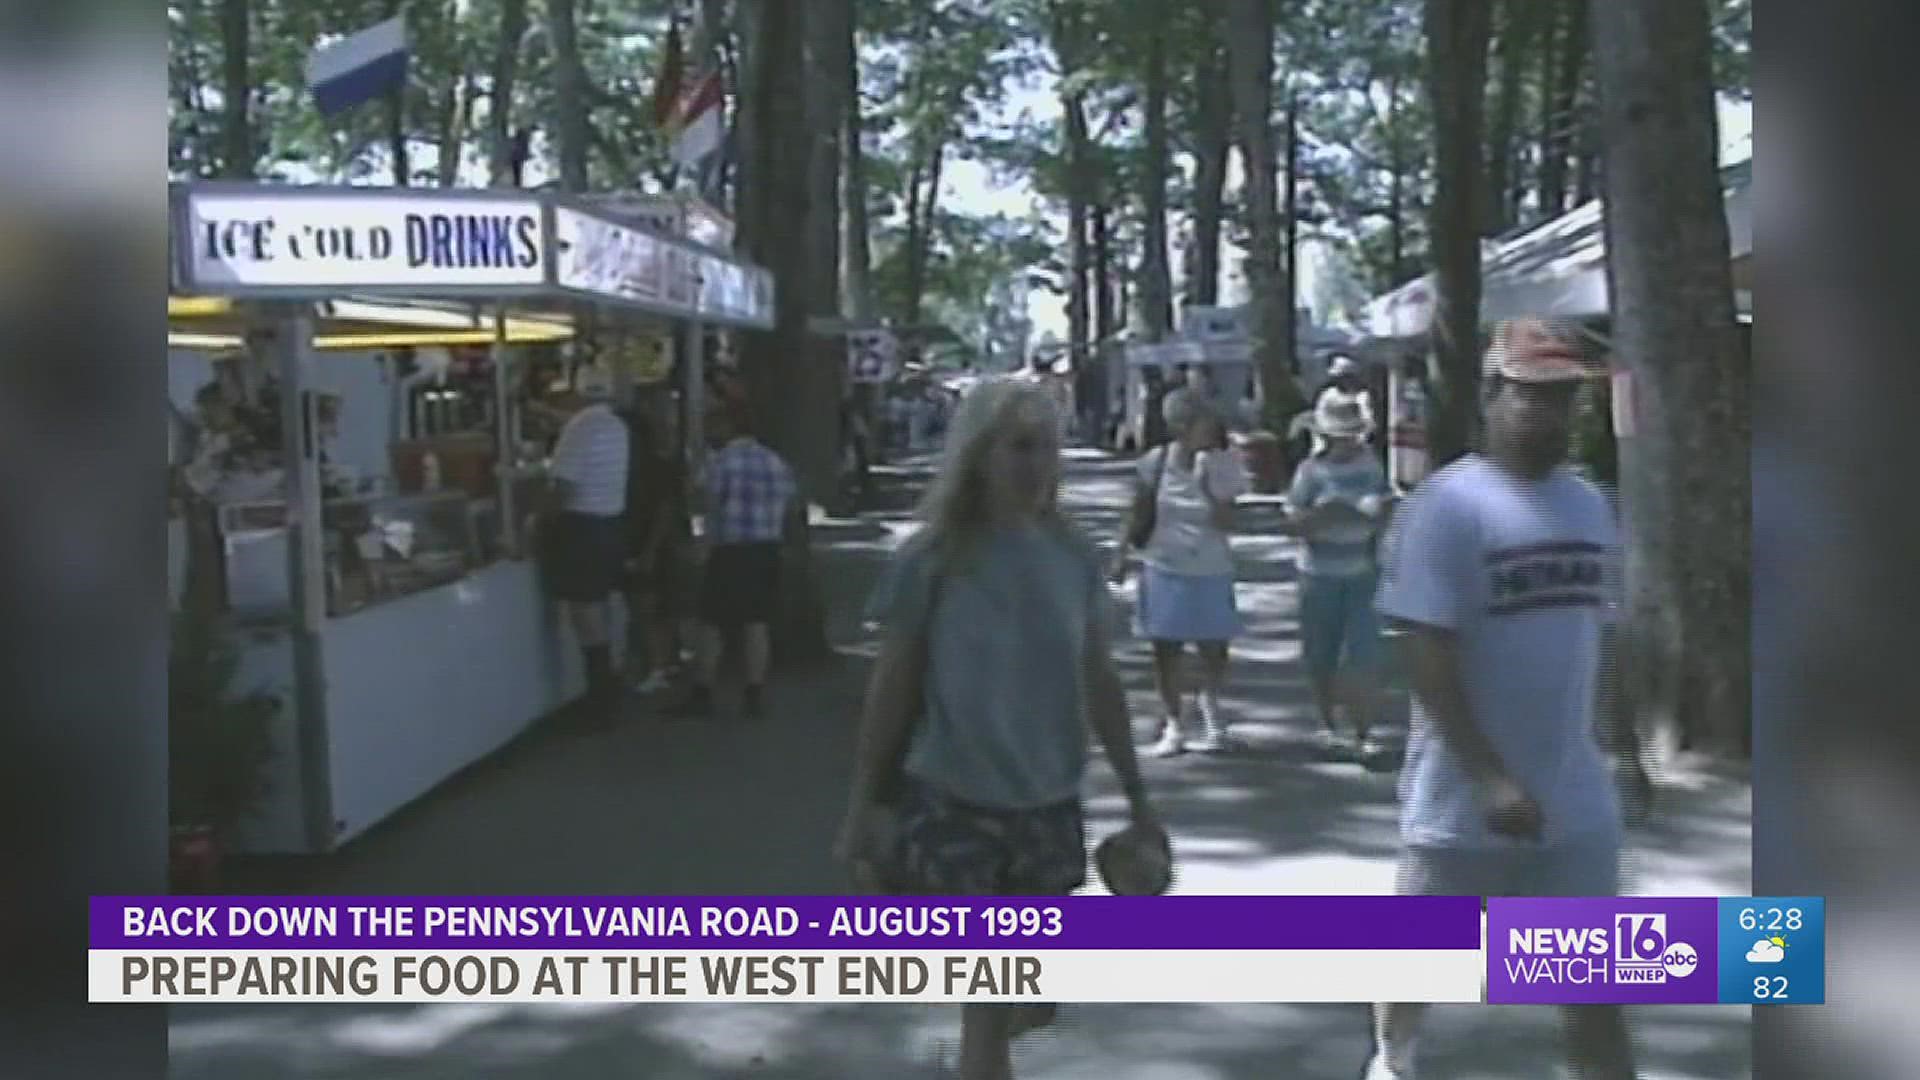 Take a trip with Mike Stevens to 1993 and sample the finest fair food in Monroe County.